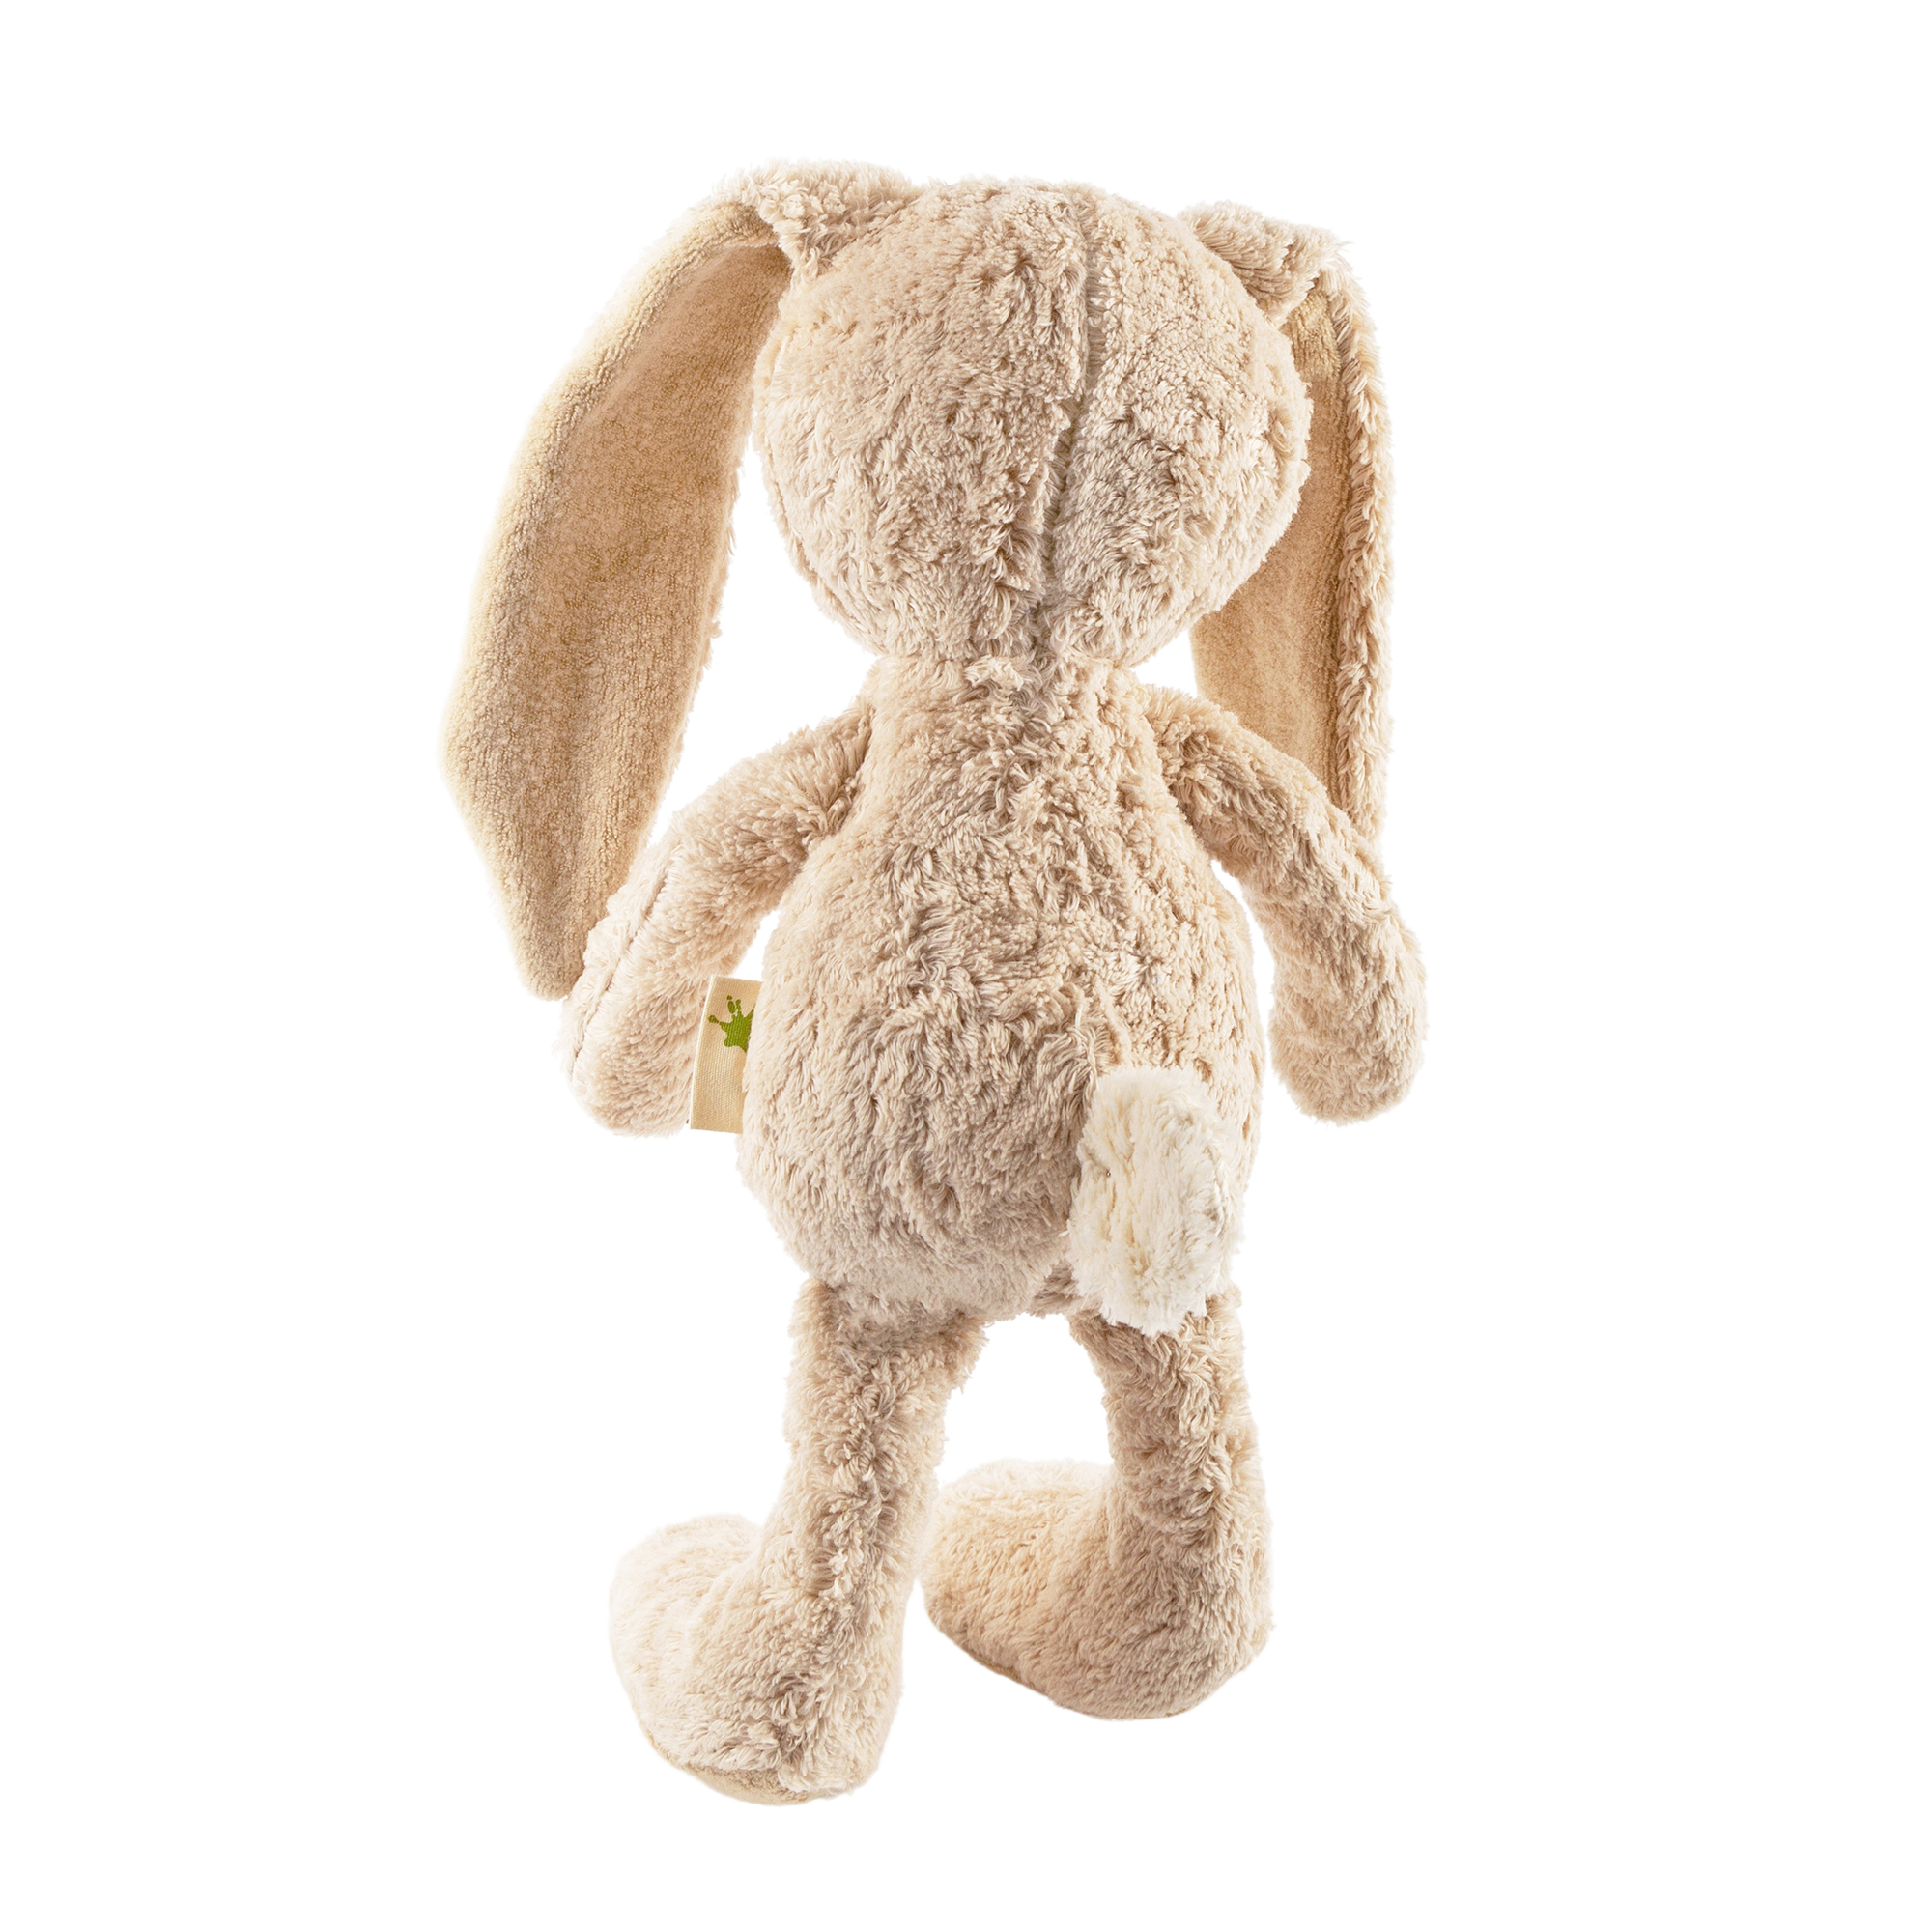 Organic soft toy rabbit, Green Collection